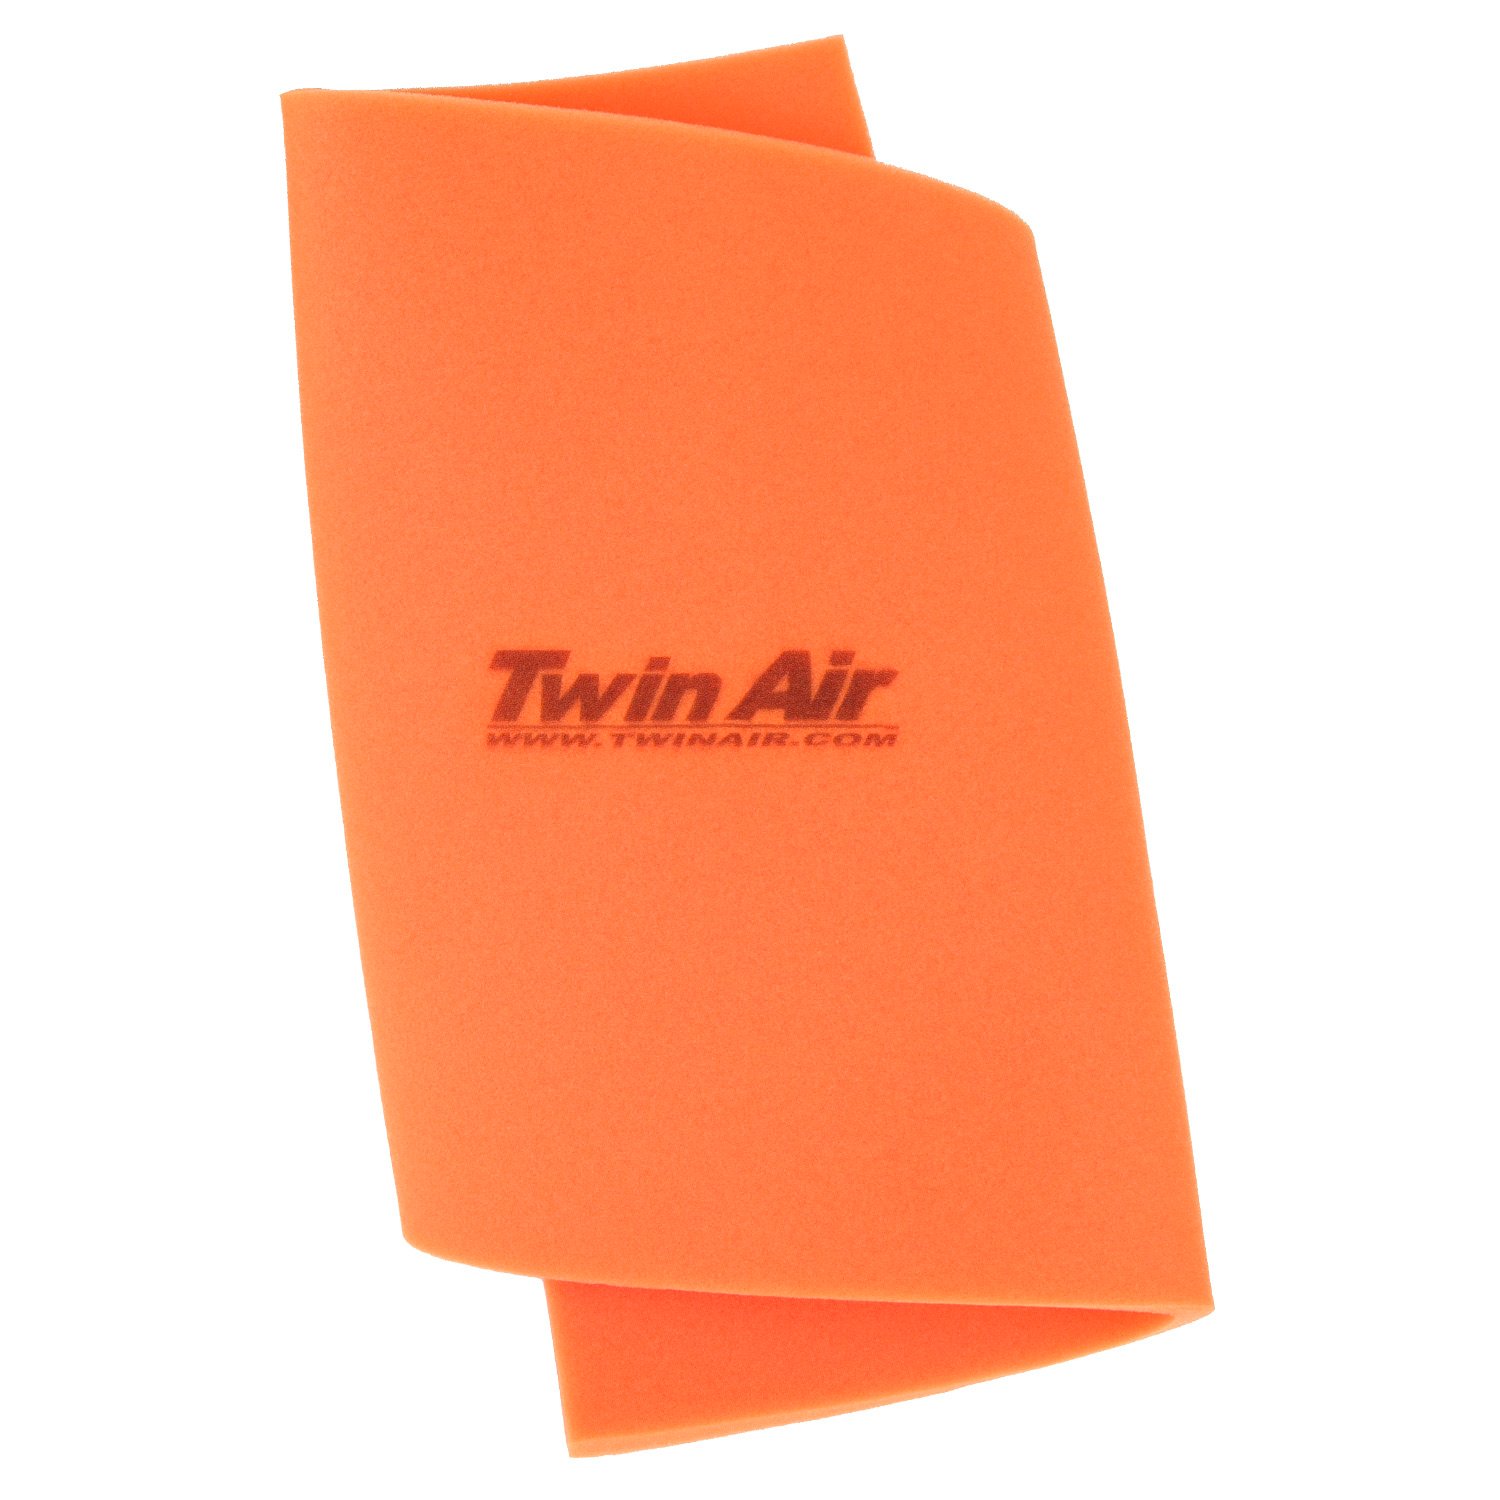 Twin Air Air Filter Pad  Onefold, 600 x 300 x 10 mm